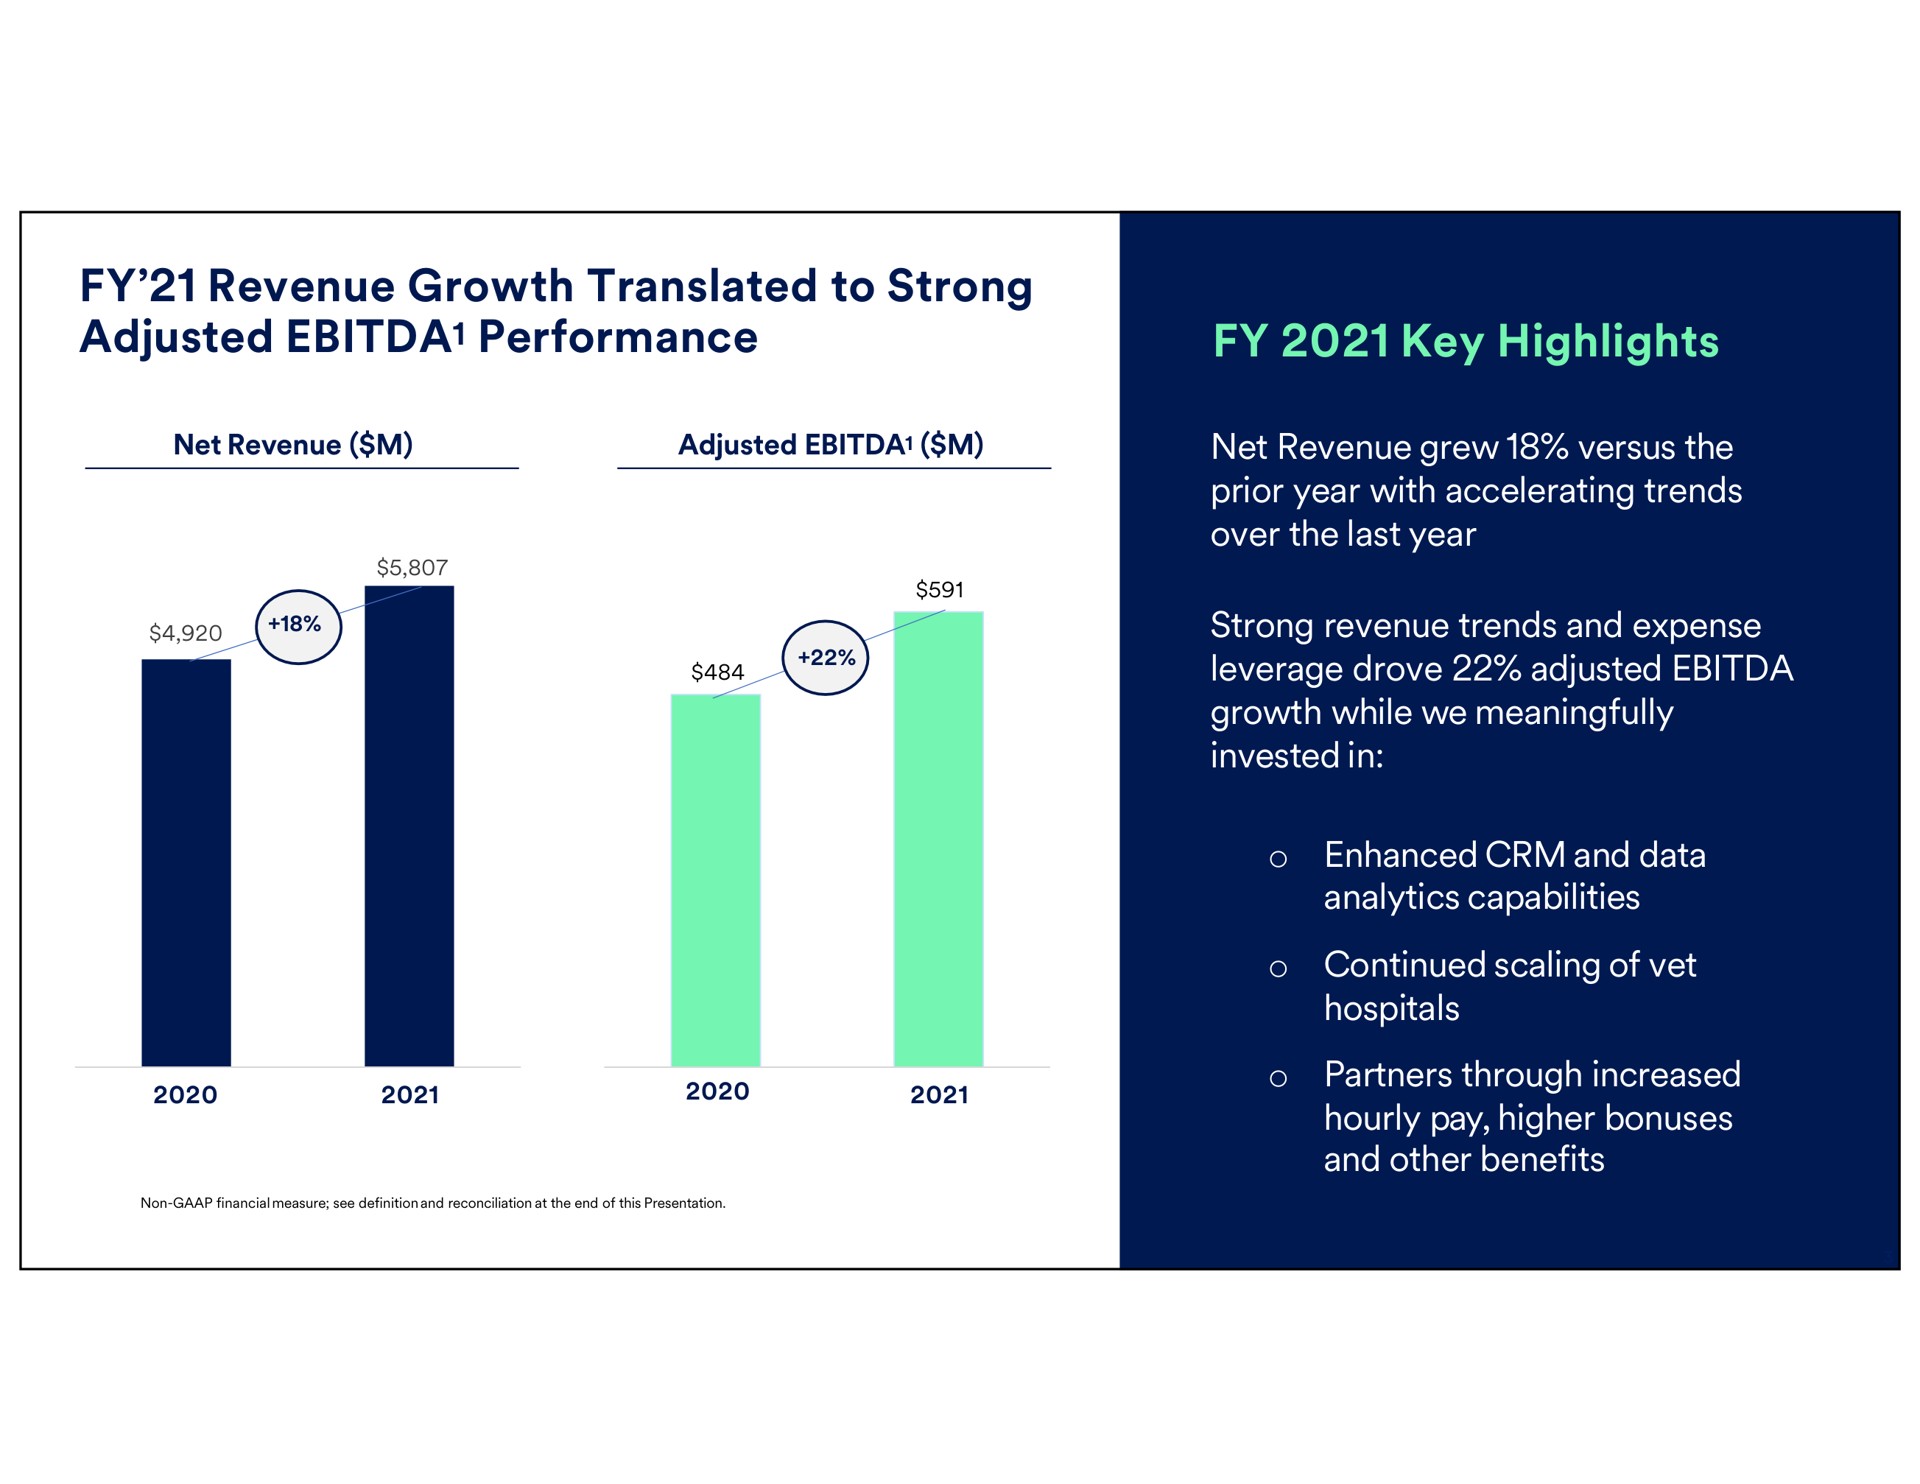 revenue growth translated to strong adjusted performance key highlights net net grew versus the prior year with accelerating trends male trends and expense leverage drove while we meaningfully invested in reconciliation at the end of this presentation partners through increased hourly pay higher bonuses and other benefits continued scaling of vet hospitals enhanced and data analytics capabilities non financial measure see definition and | Petco